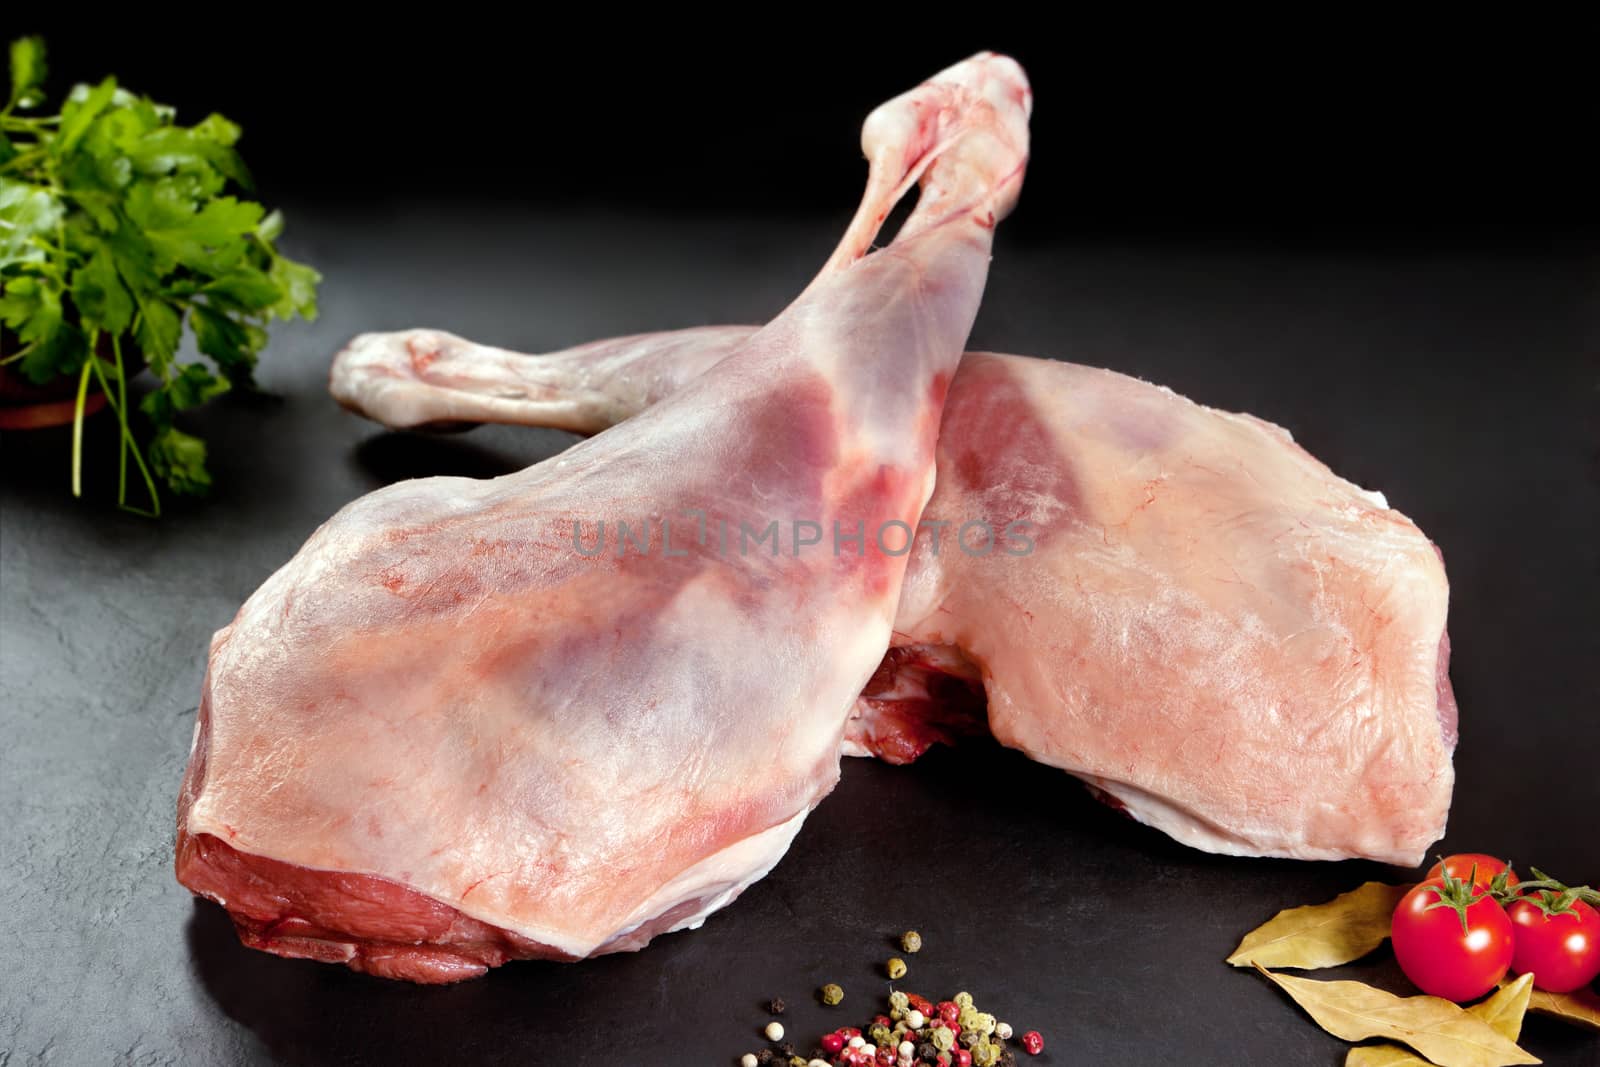 
Fresh and raw meat. Leg of lamb uncooked tomato and pepper on black background by Ainat